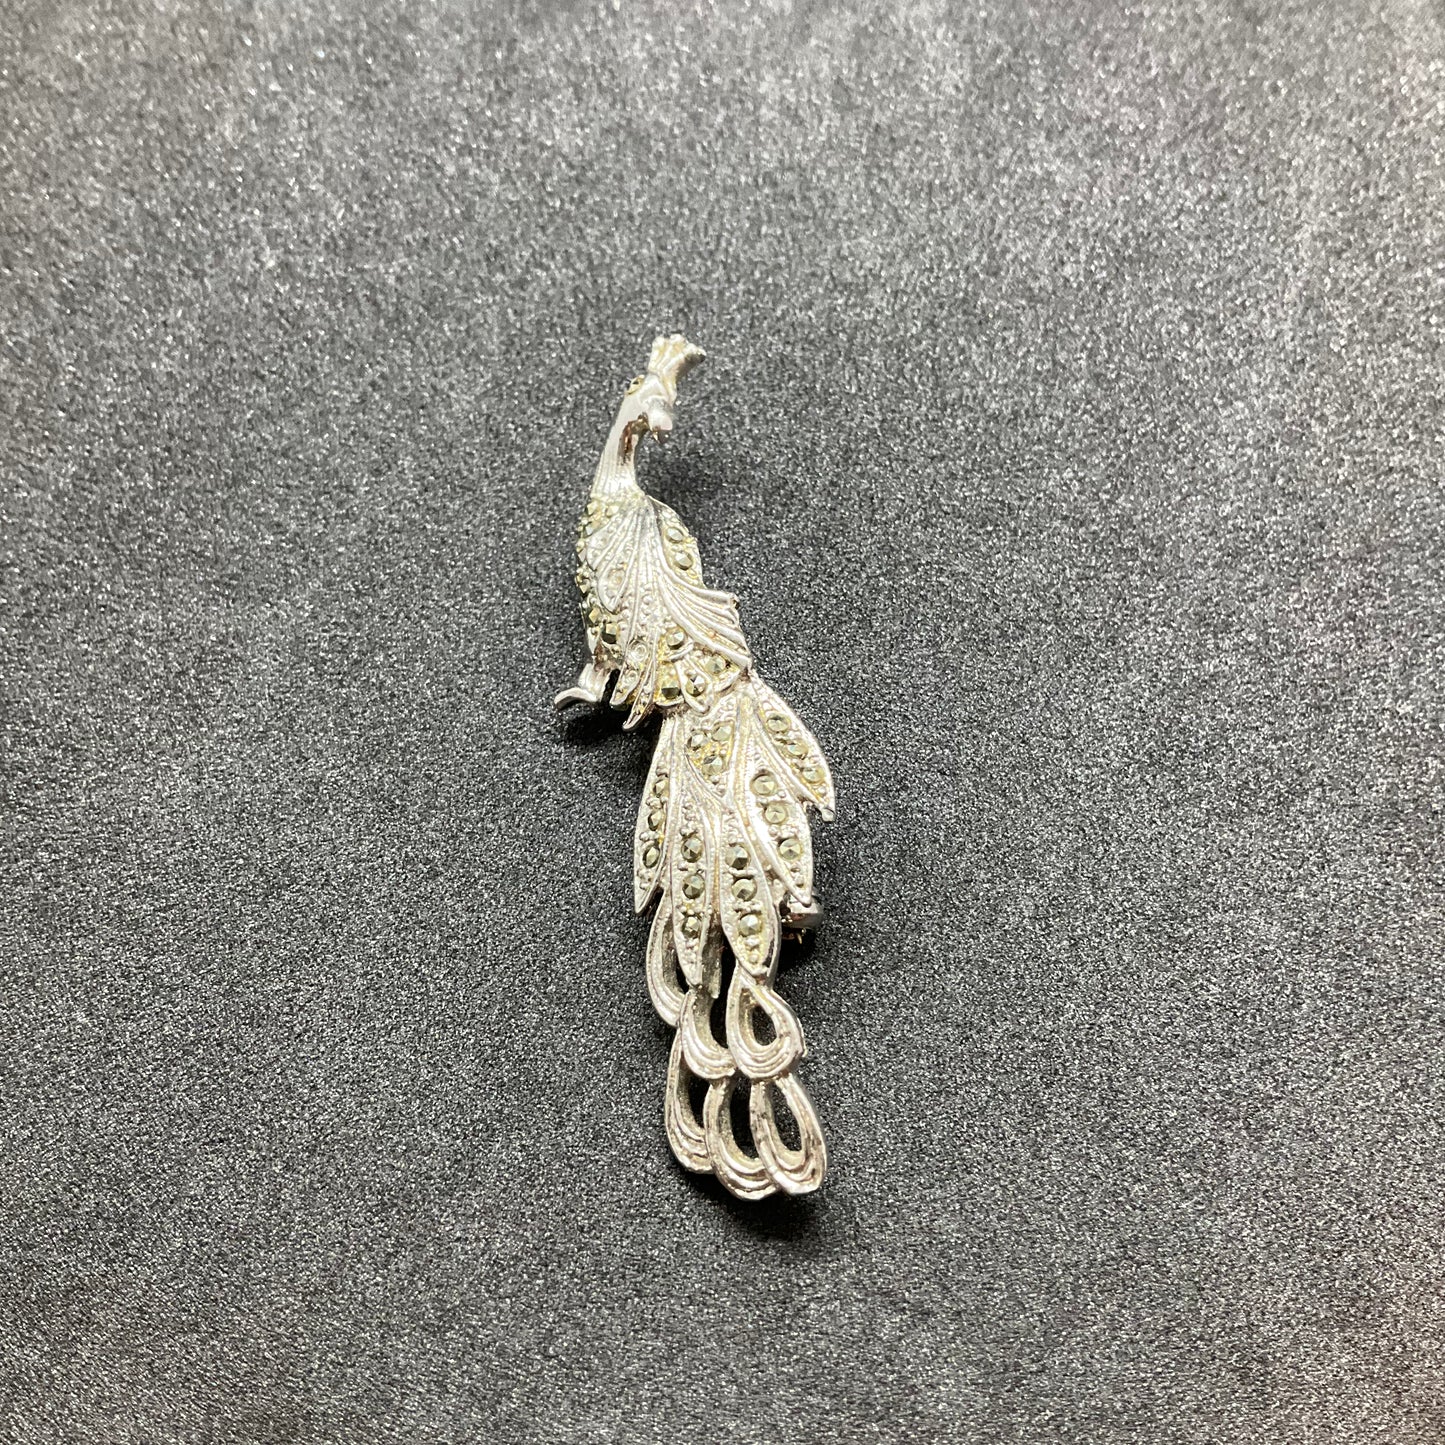 Vintage 1940/50s silver tone and Marcasite Stone Peacock Brooch